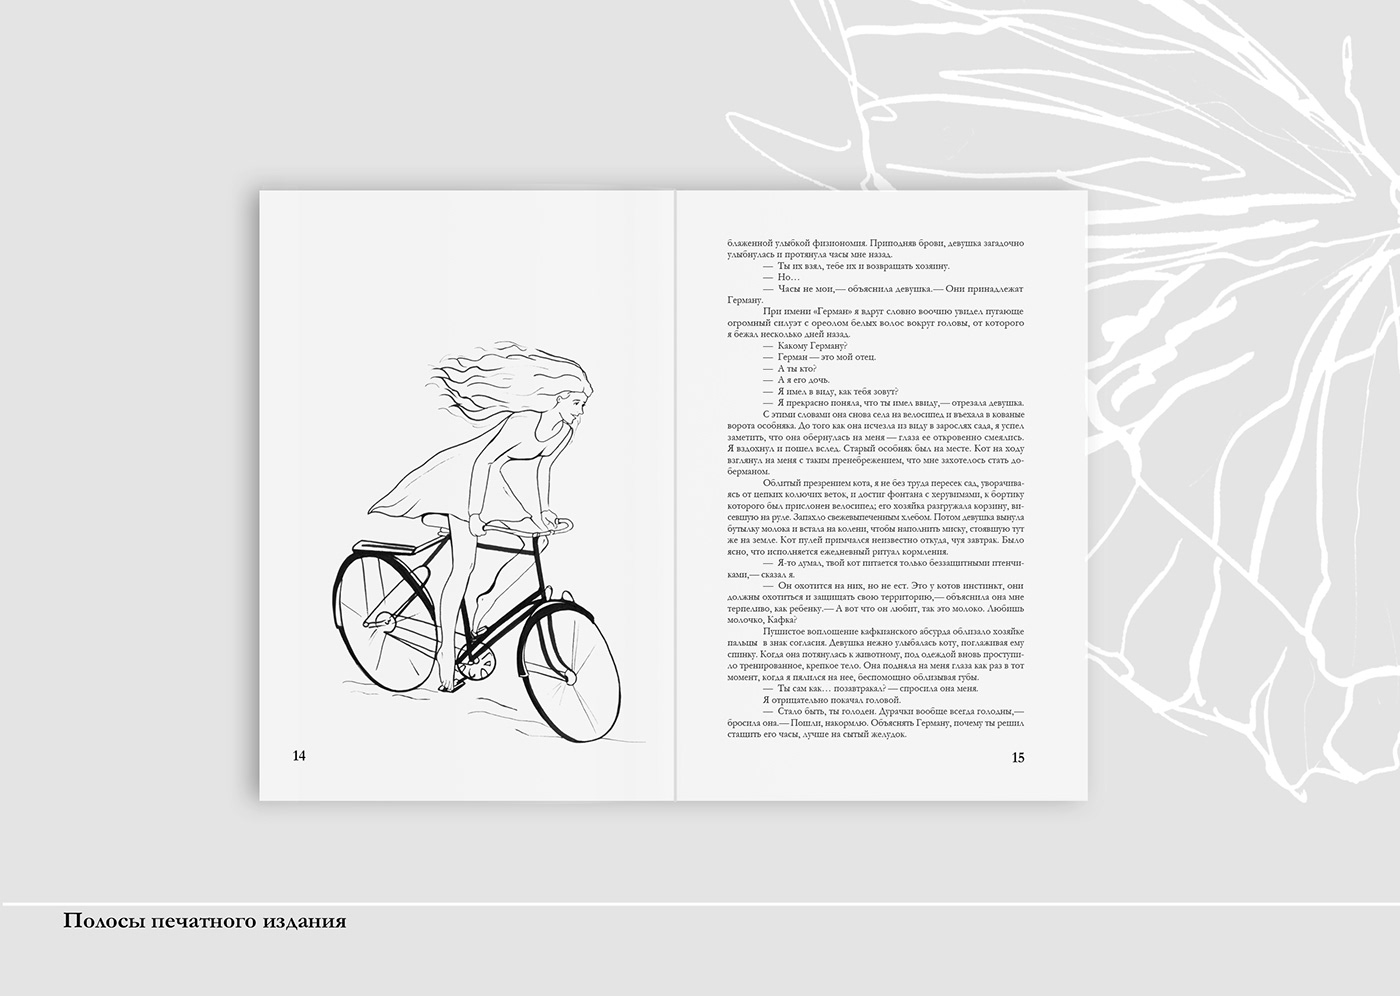 Author's EDITION book composition editorialdesign graphicdesign Illustrated book illustrations print edition printdesign publish